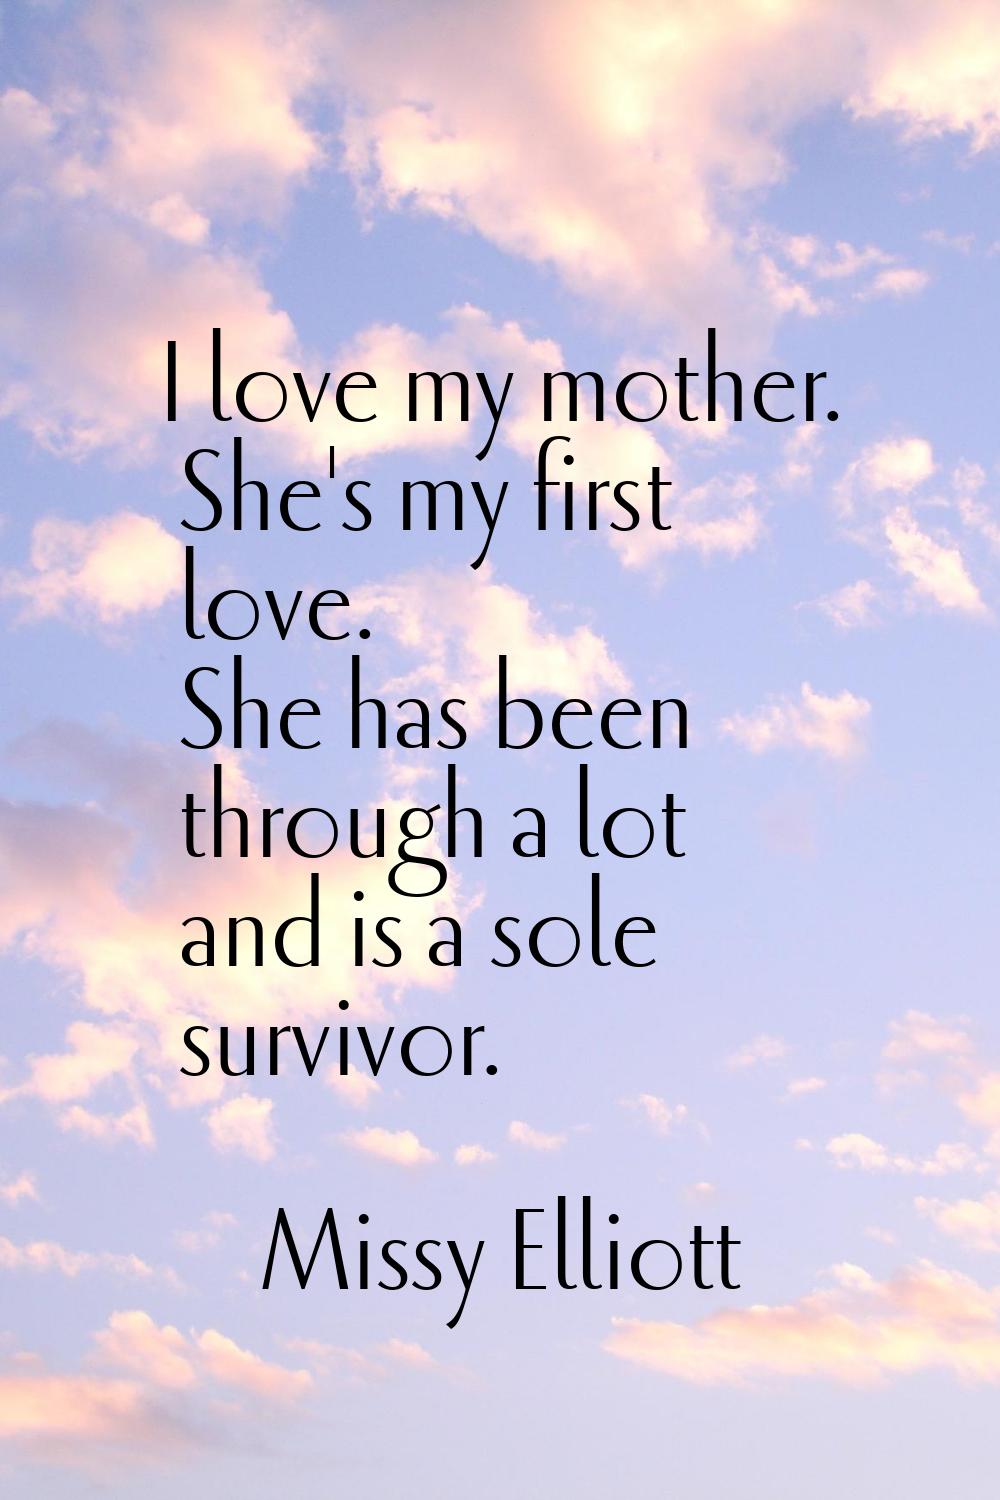 I love my mother. She's my first love. She has been through a lot and is a sole survivor.